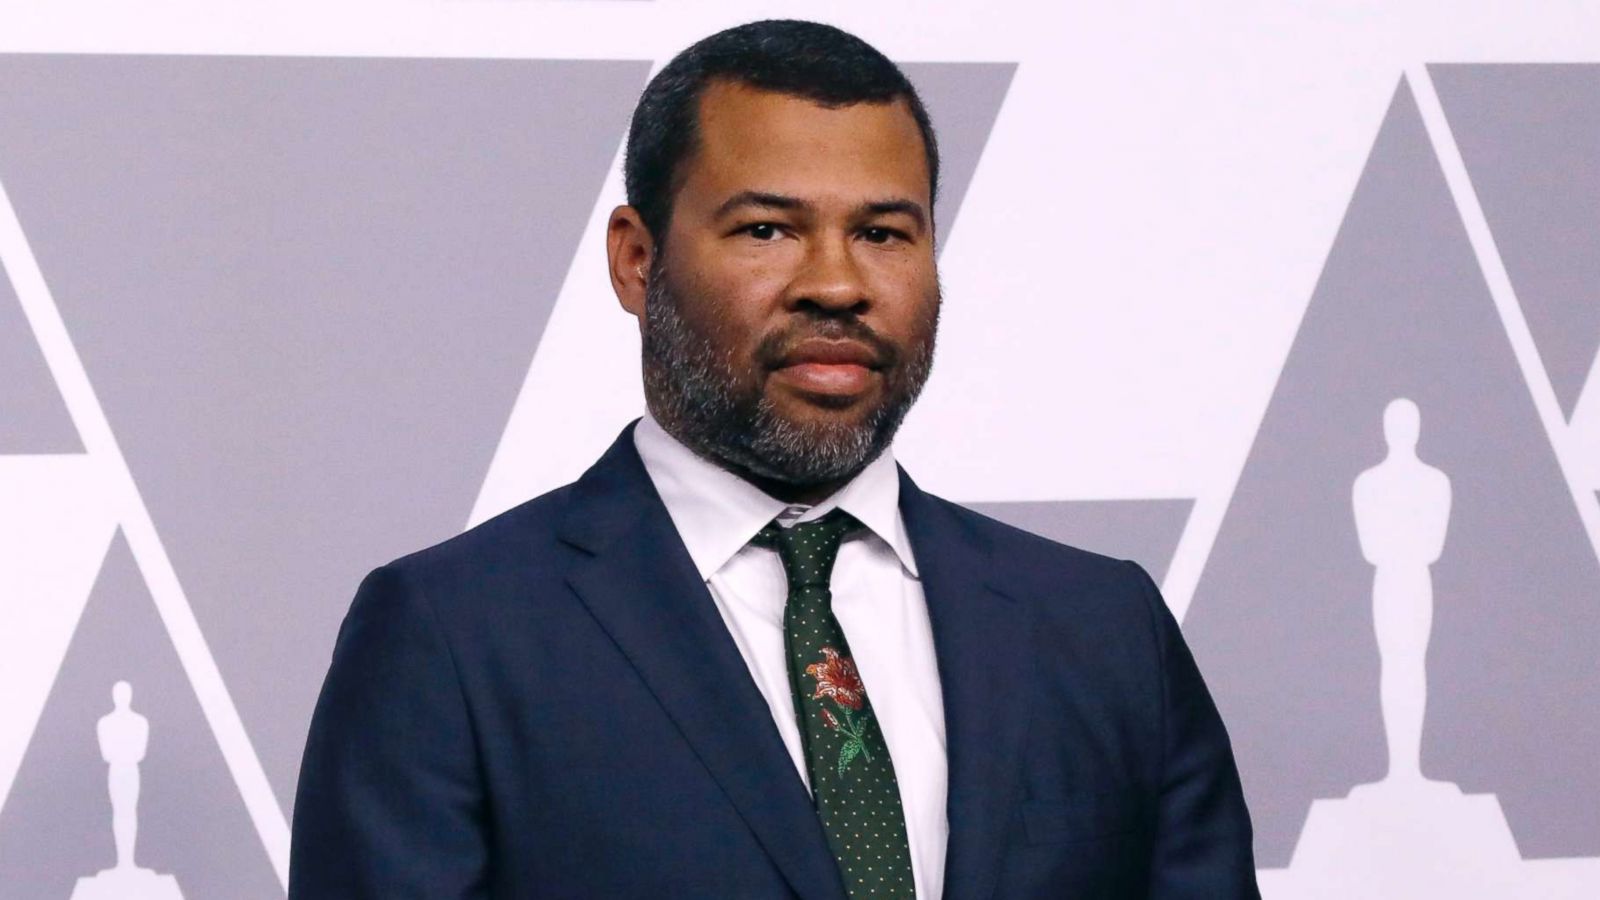 PHOTO: Jordan Peele attends the 90th Oscars nominees luncheon in Los Angeles, Feb. 5, 2018.